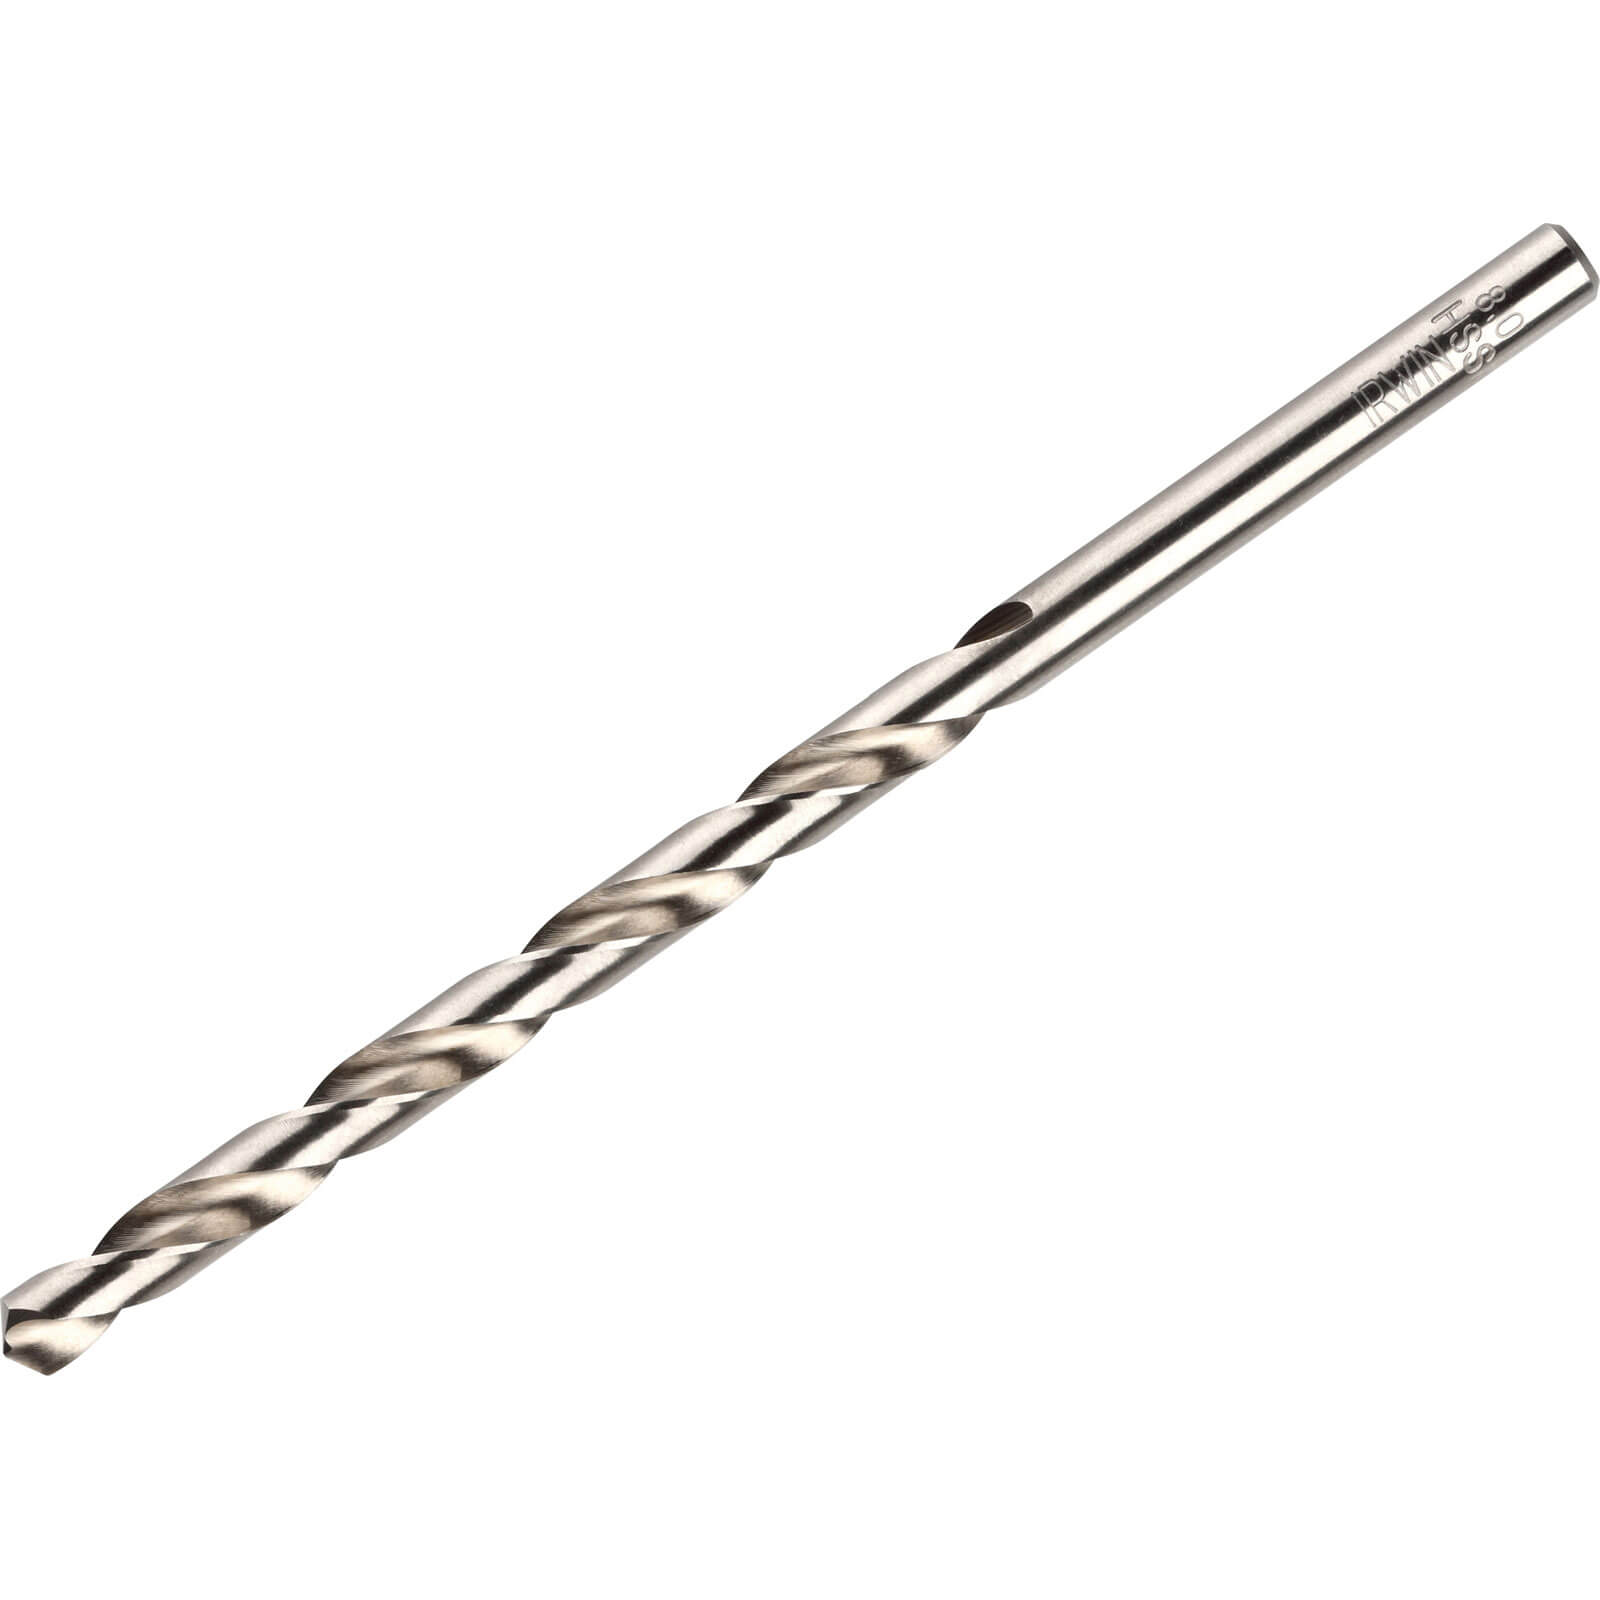 Photo of Irwin Hss Pro Drill Bits 9mm Pack Of 1